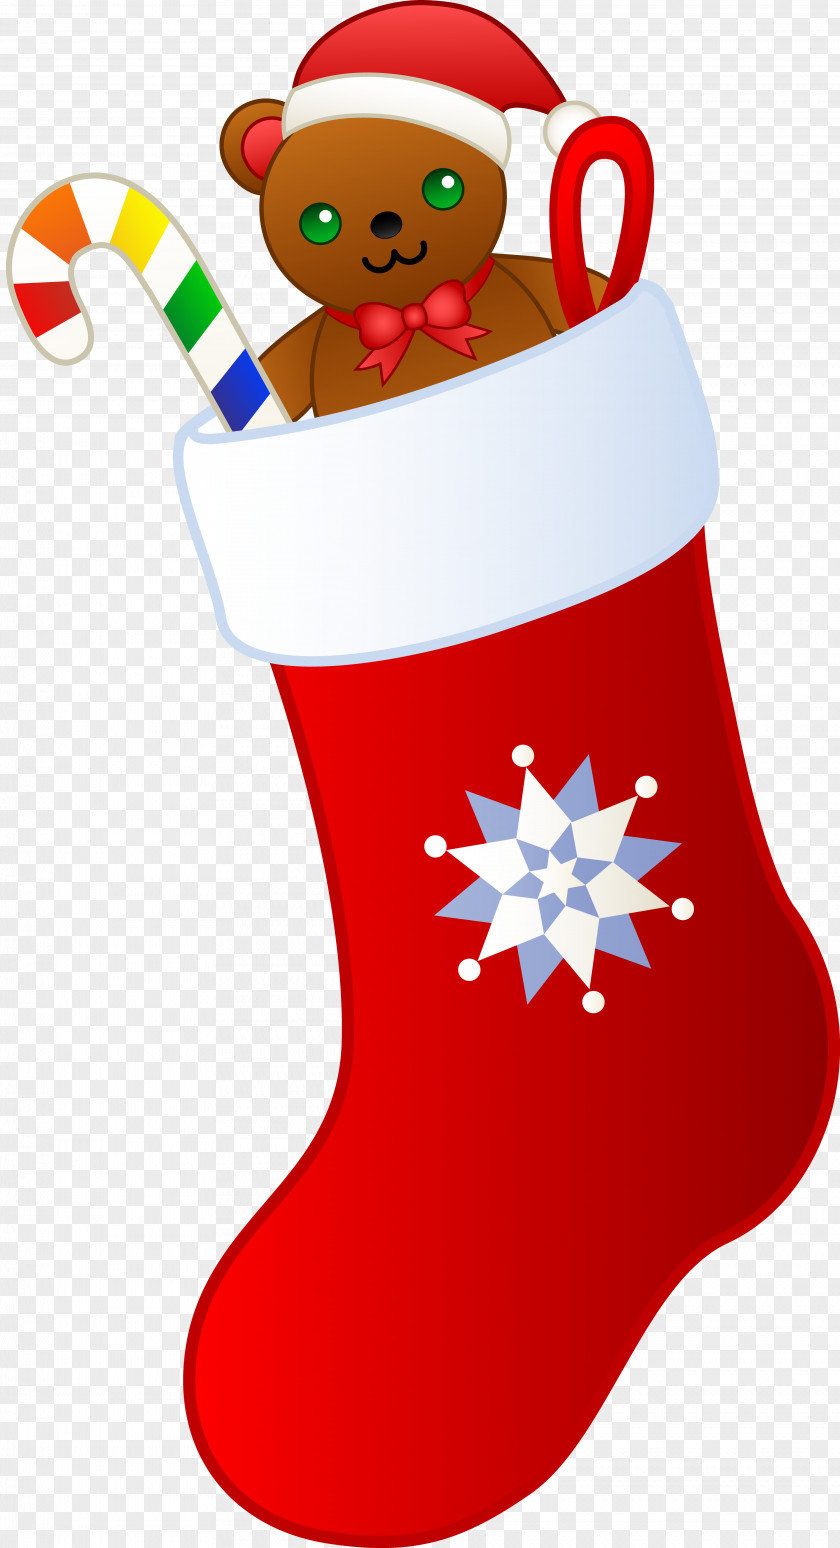 Christmas Stockings Pictures Candy Cane Stocking Free Content Clip Art PNG